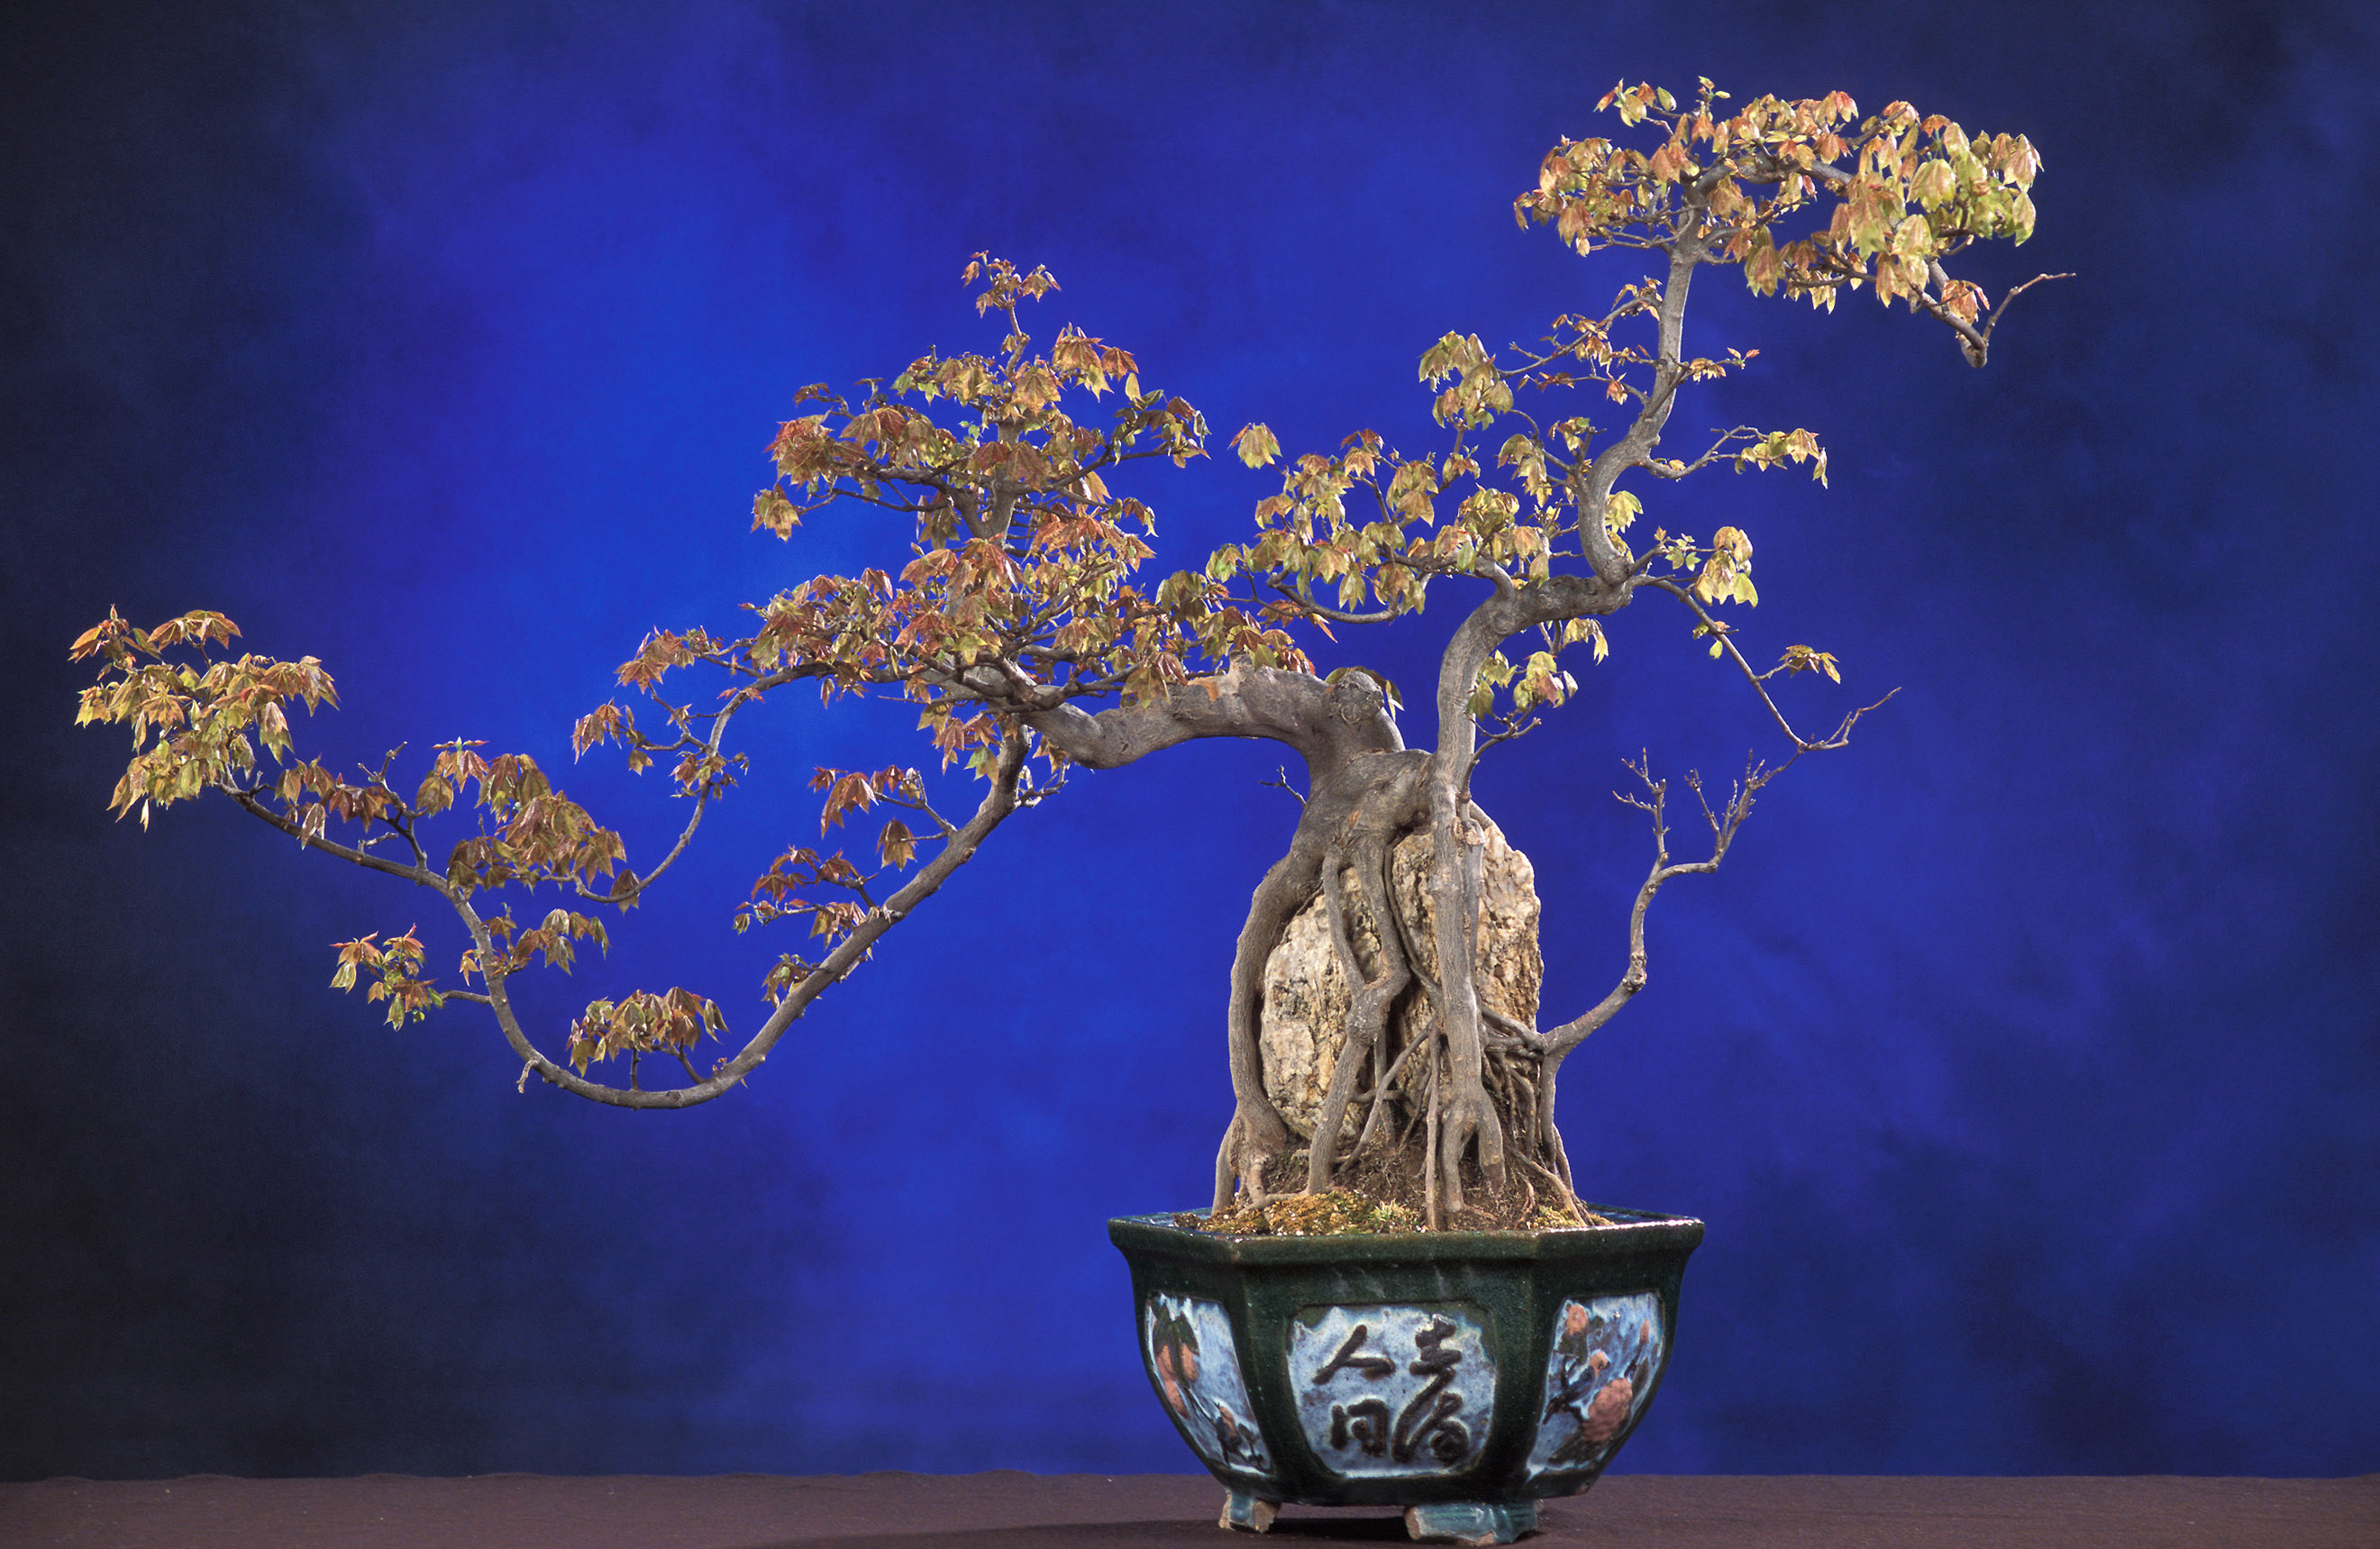 Bonsai Tree Background Images HD Pictures and Wallpaper For Free Download   Pngtree